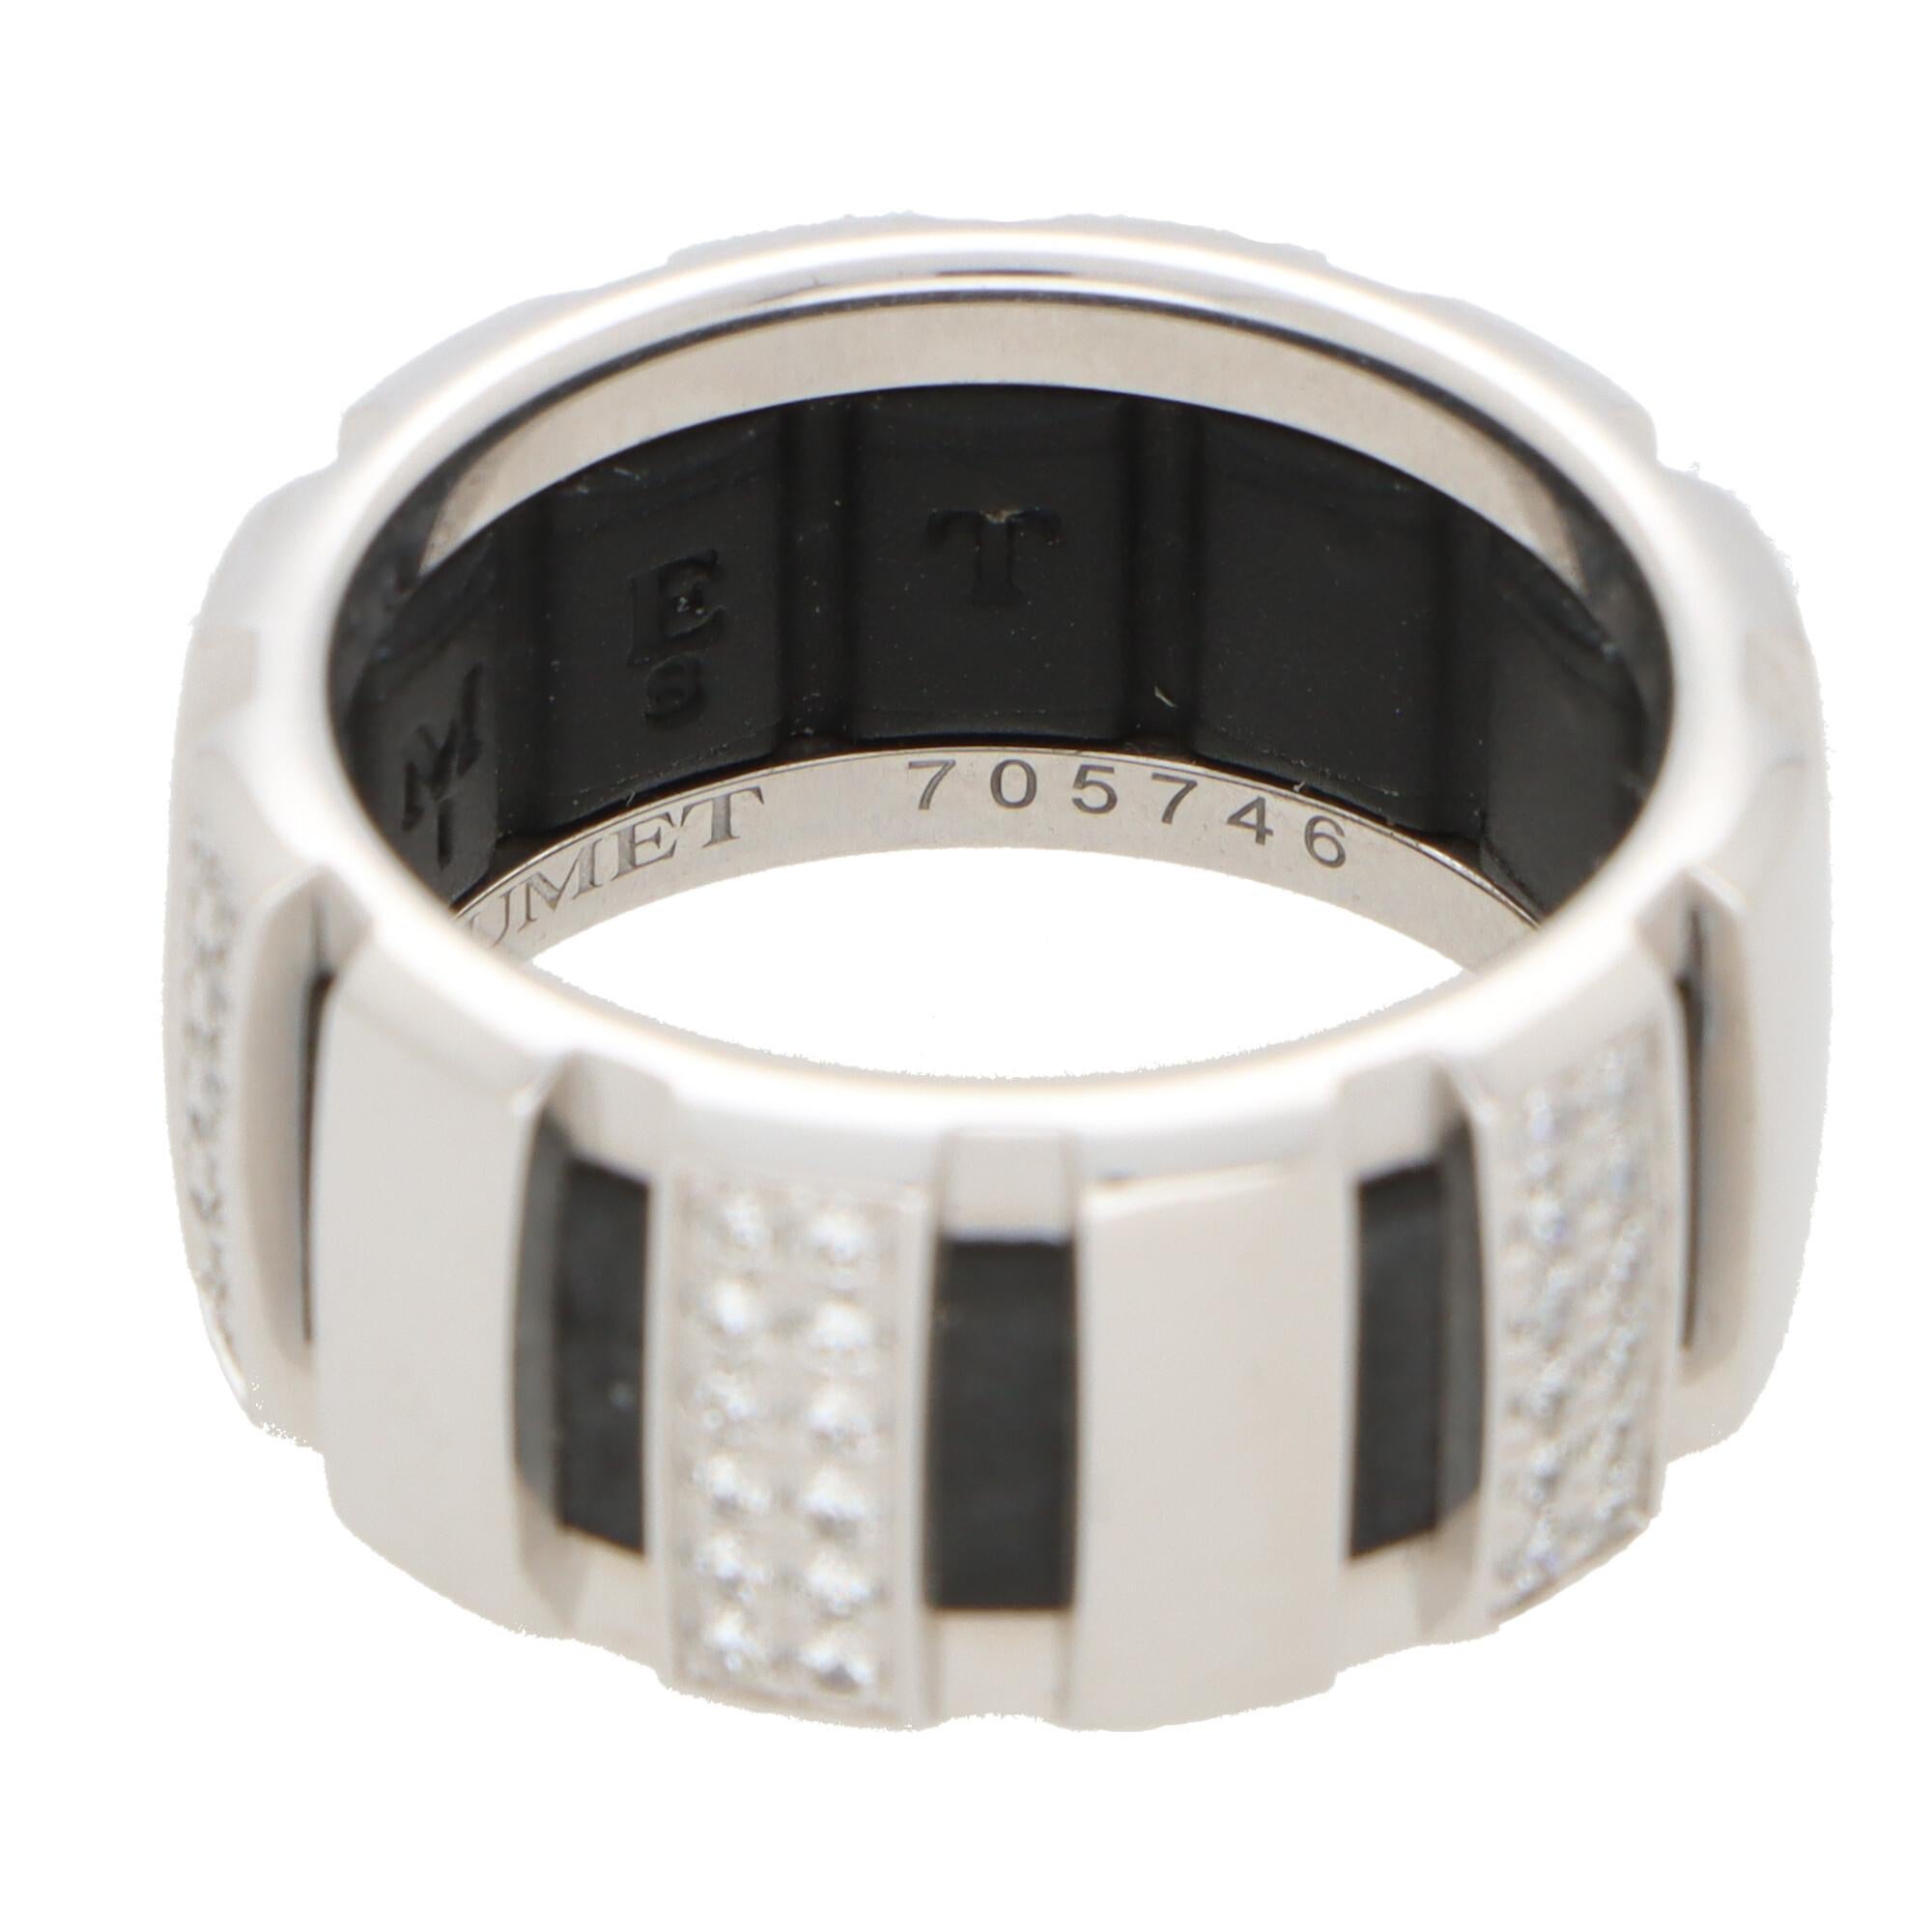 Modern Vintage Chaumet 'Class One' Rubber and Diamond Band Ring in 18k White Gold For Sale